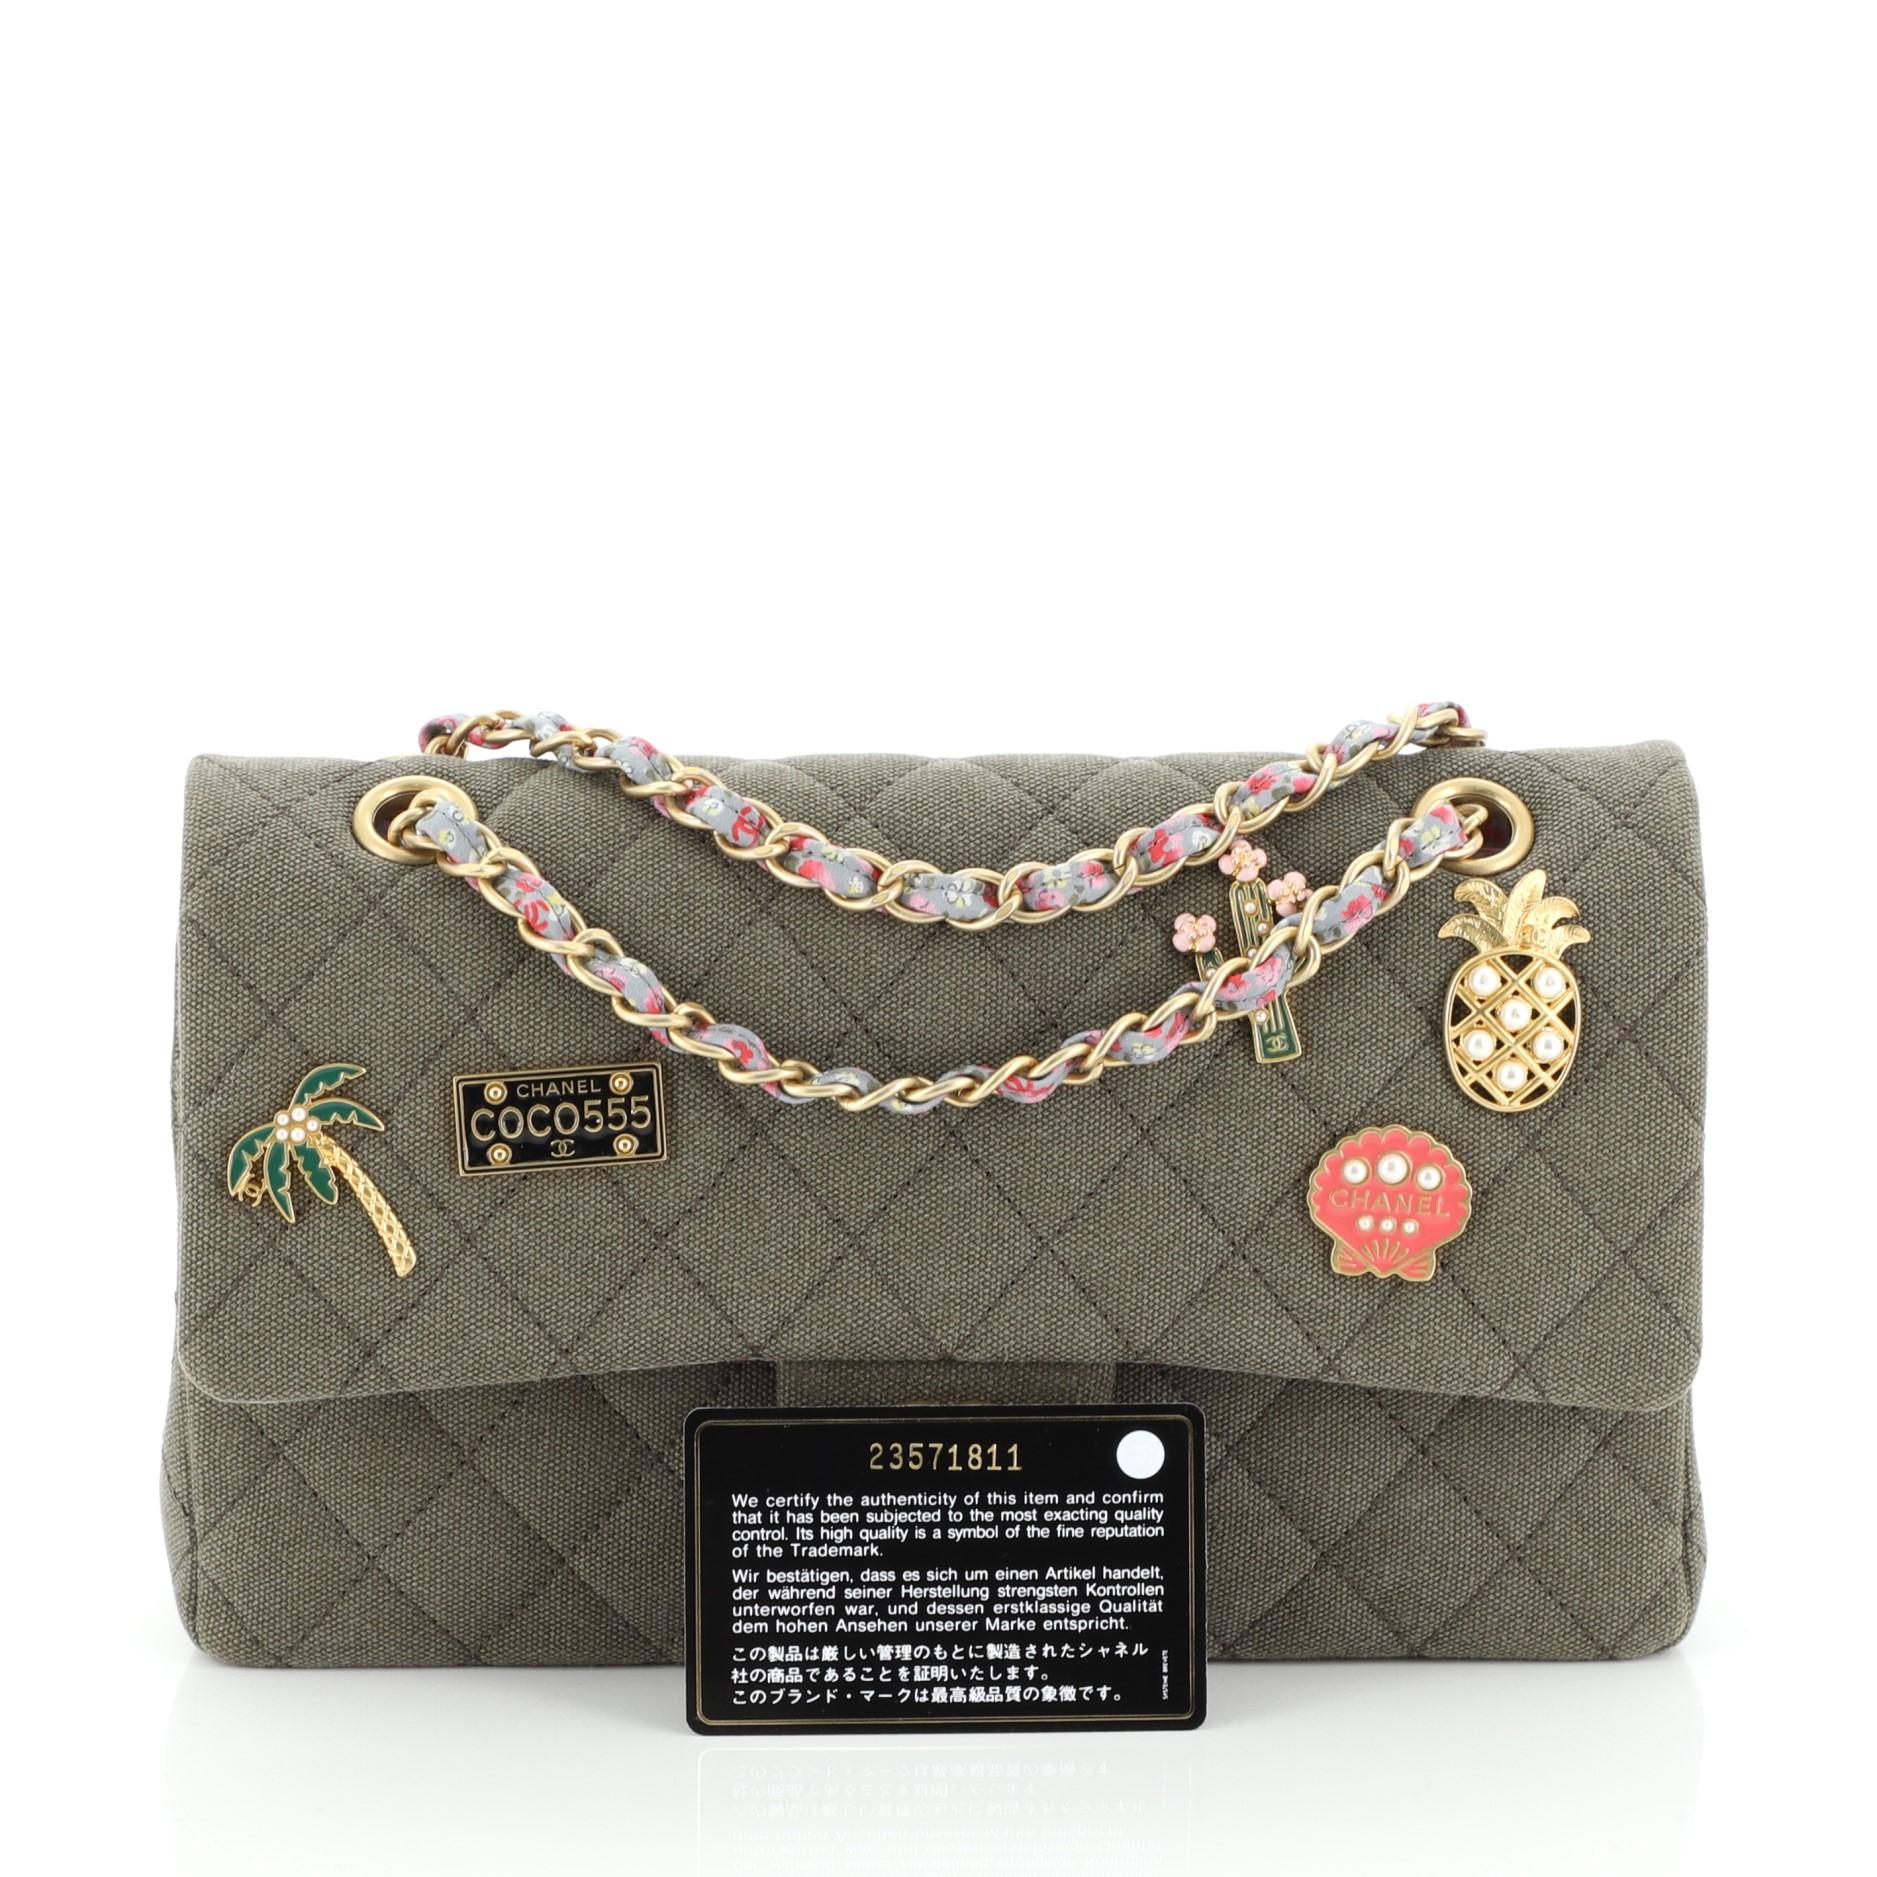 This Chanel Cuba Charms Classic Double Flap Bag Quilted Canvas Medium, crafted from green quilted canvas, features woven-in fabric chain strap, exterior back pocket, multicolor charms and gold-tone hardware. Its CC turn-lock closure opens to a